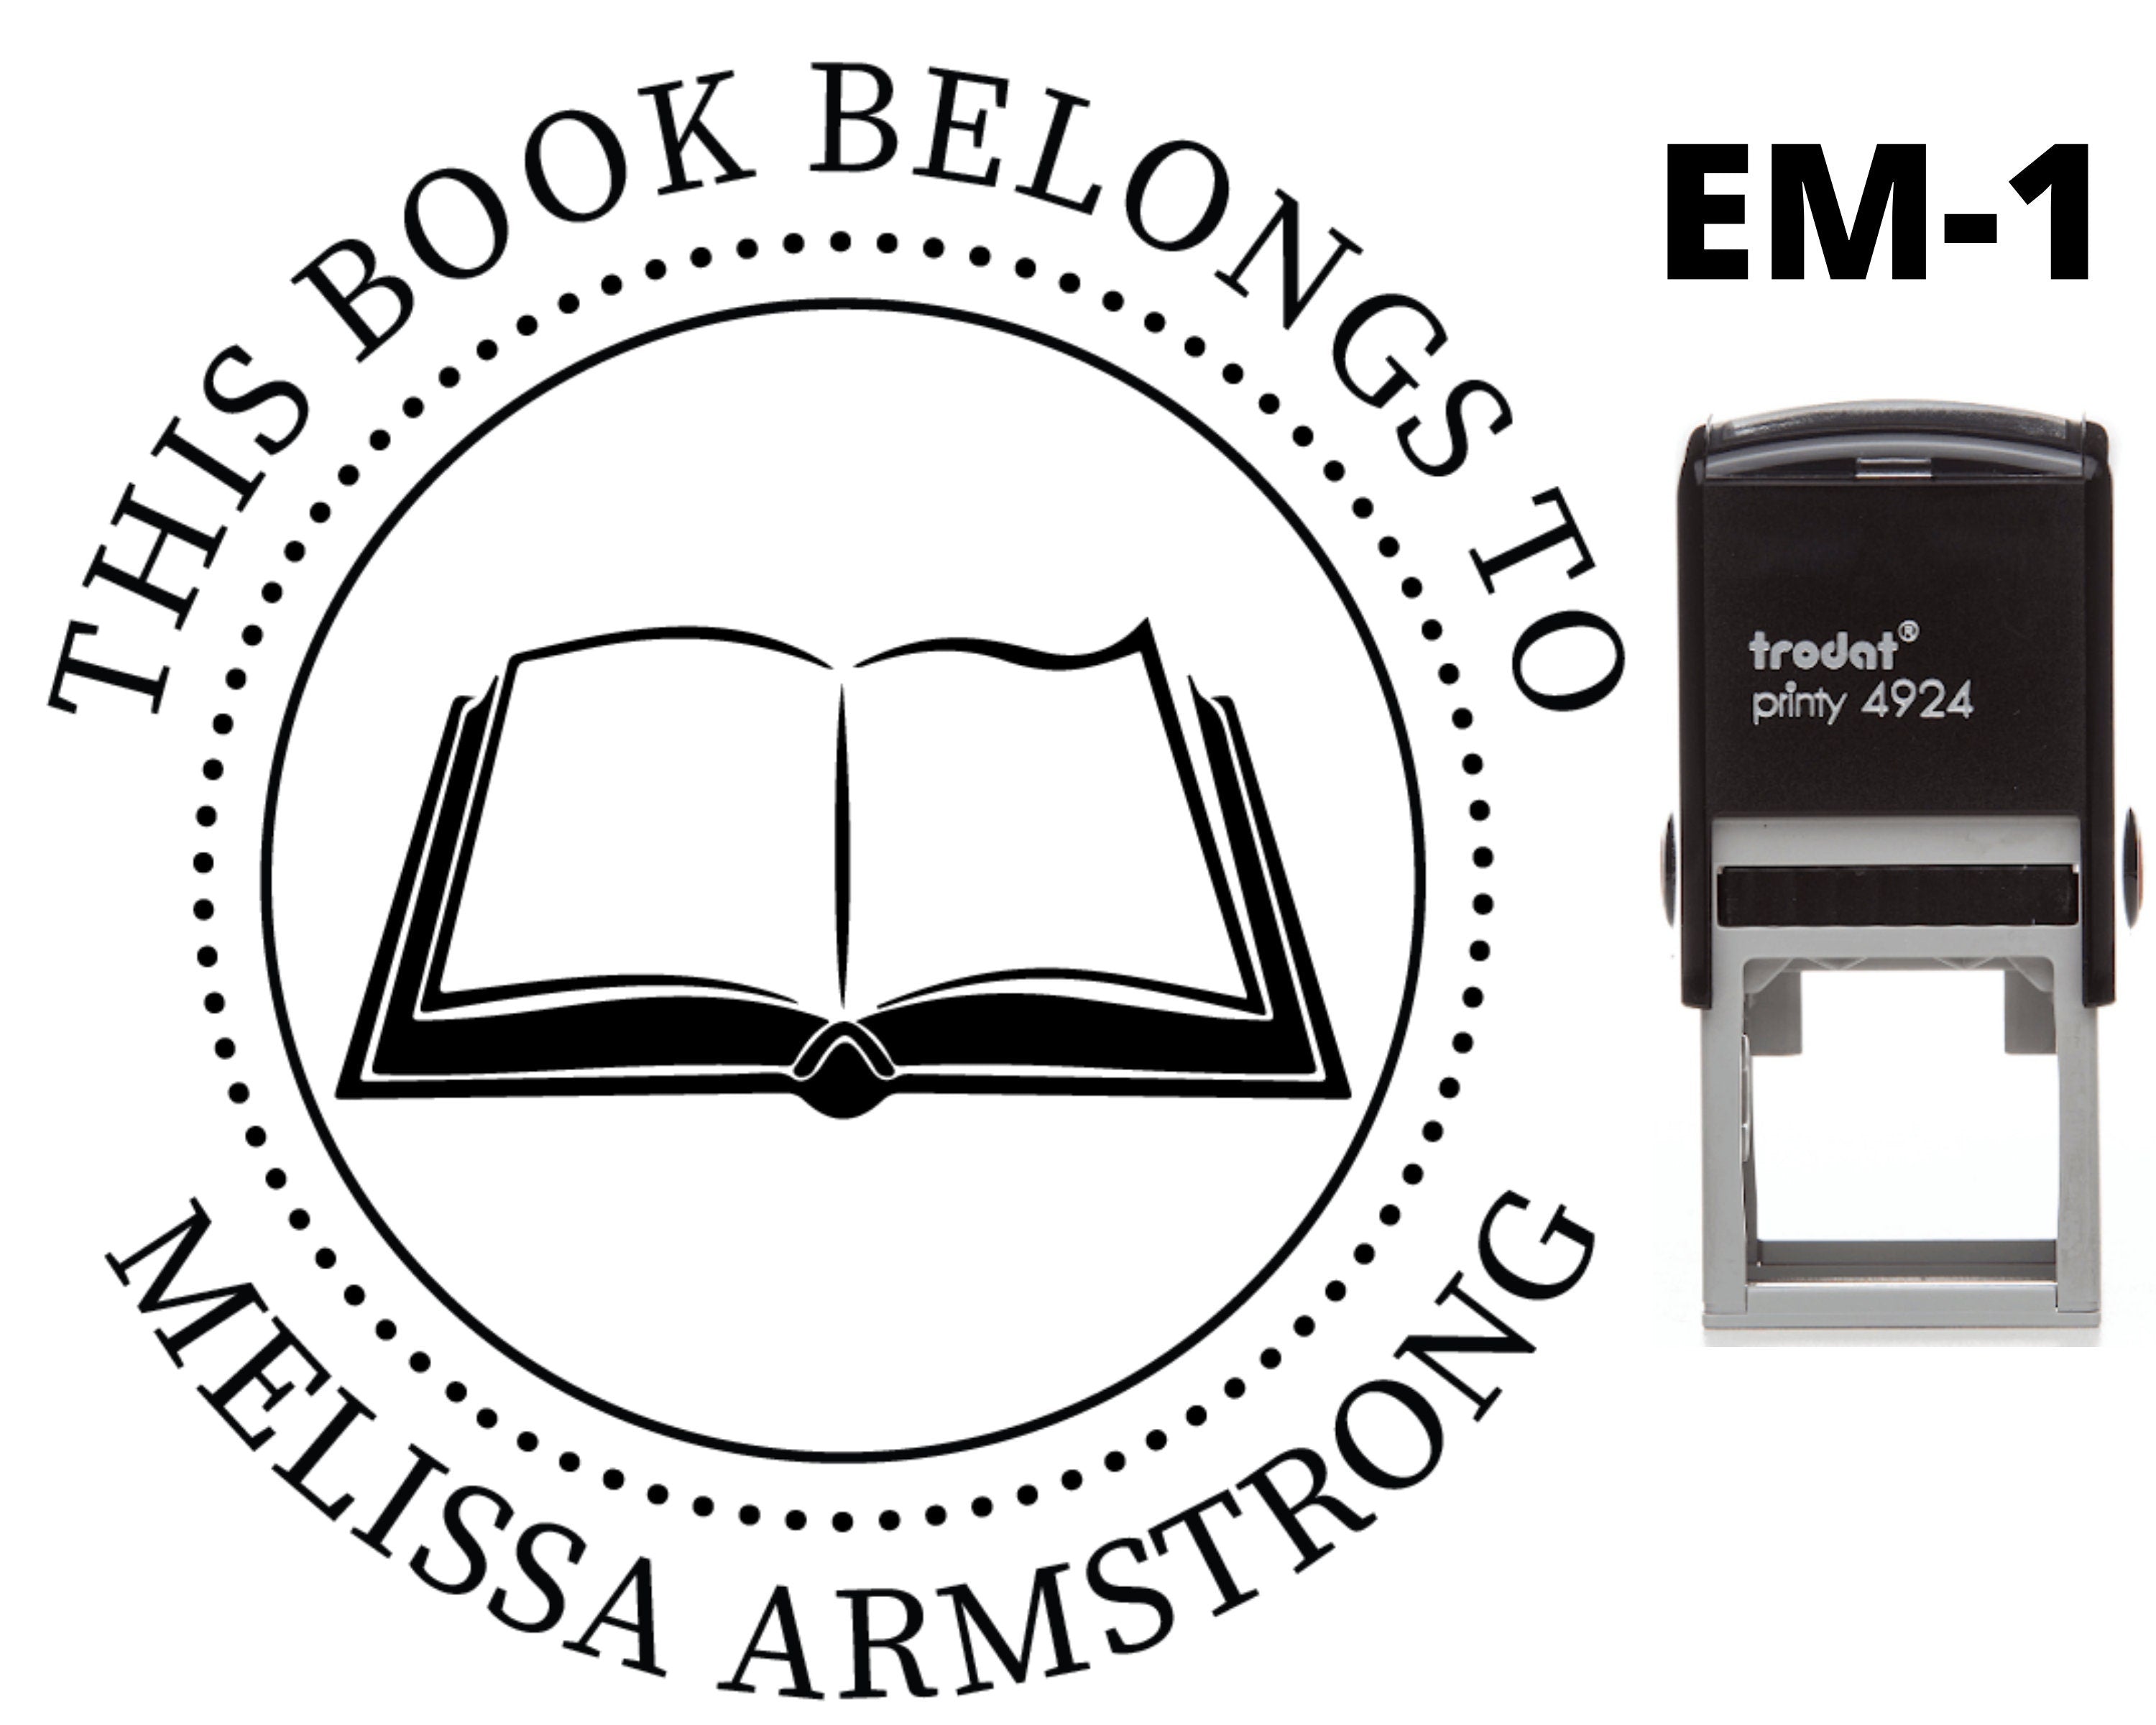 This Book Belongs to Stamp, Book Stamp, Library Stamp, Personalized Book  Stamp, Teacher Stamp, Librarians Stamp 